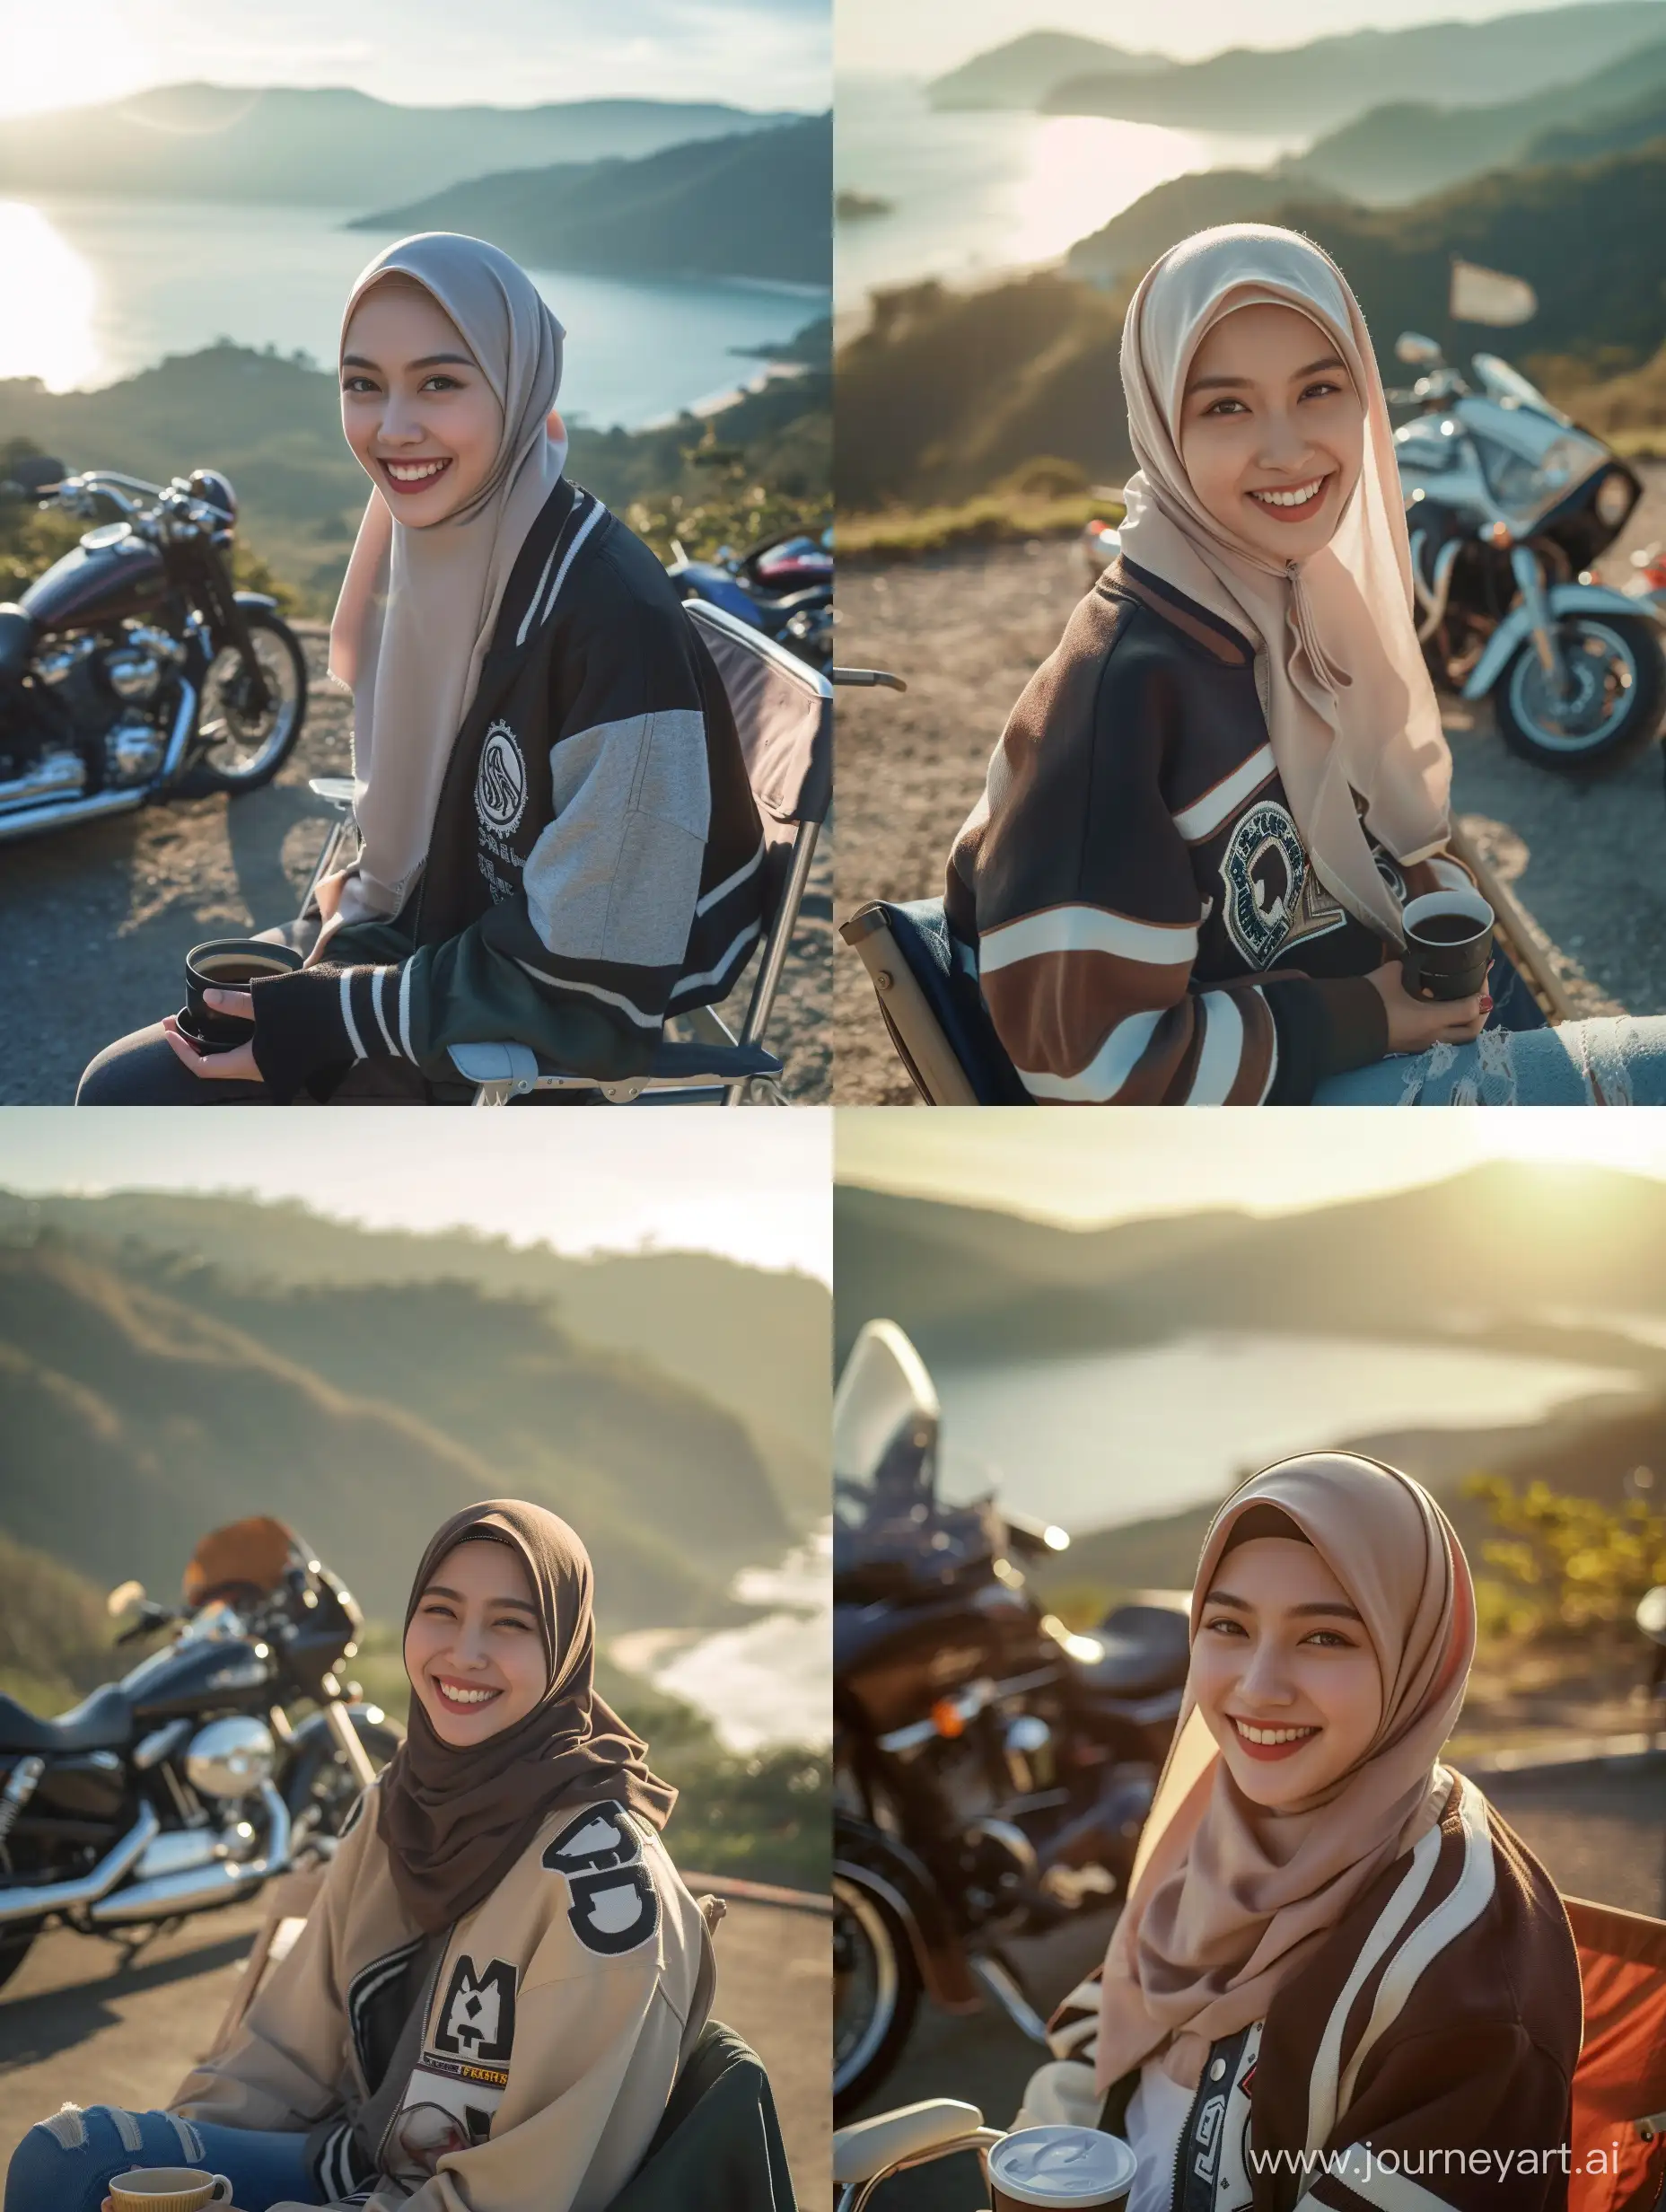 Beautiful woman wearing a Korean hijab (25 years old, oval and clean face, ideal body, Indonesian skin, smiling, wearing a cool varsity jacket, her face looks very detailed. The woman is sitting on a folding chair, behind her is a beautiful view of the mountains and ocean, alone while holding coffee, the sun is shining in the background, there is a Harley motorbike nearby, ultra HD, real photo, high detail, very sharp, 18mm lens, realistic, photography, leica camera